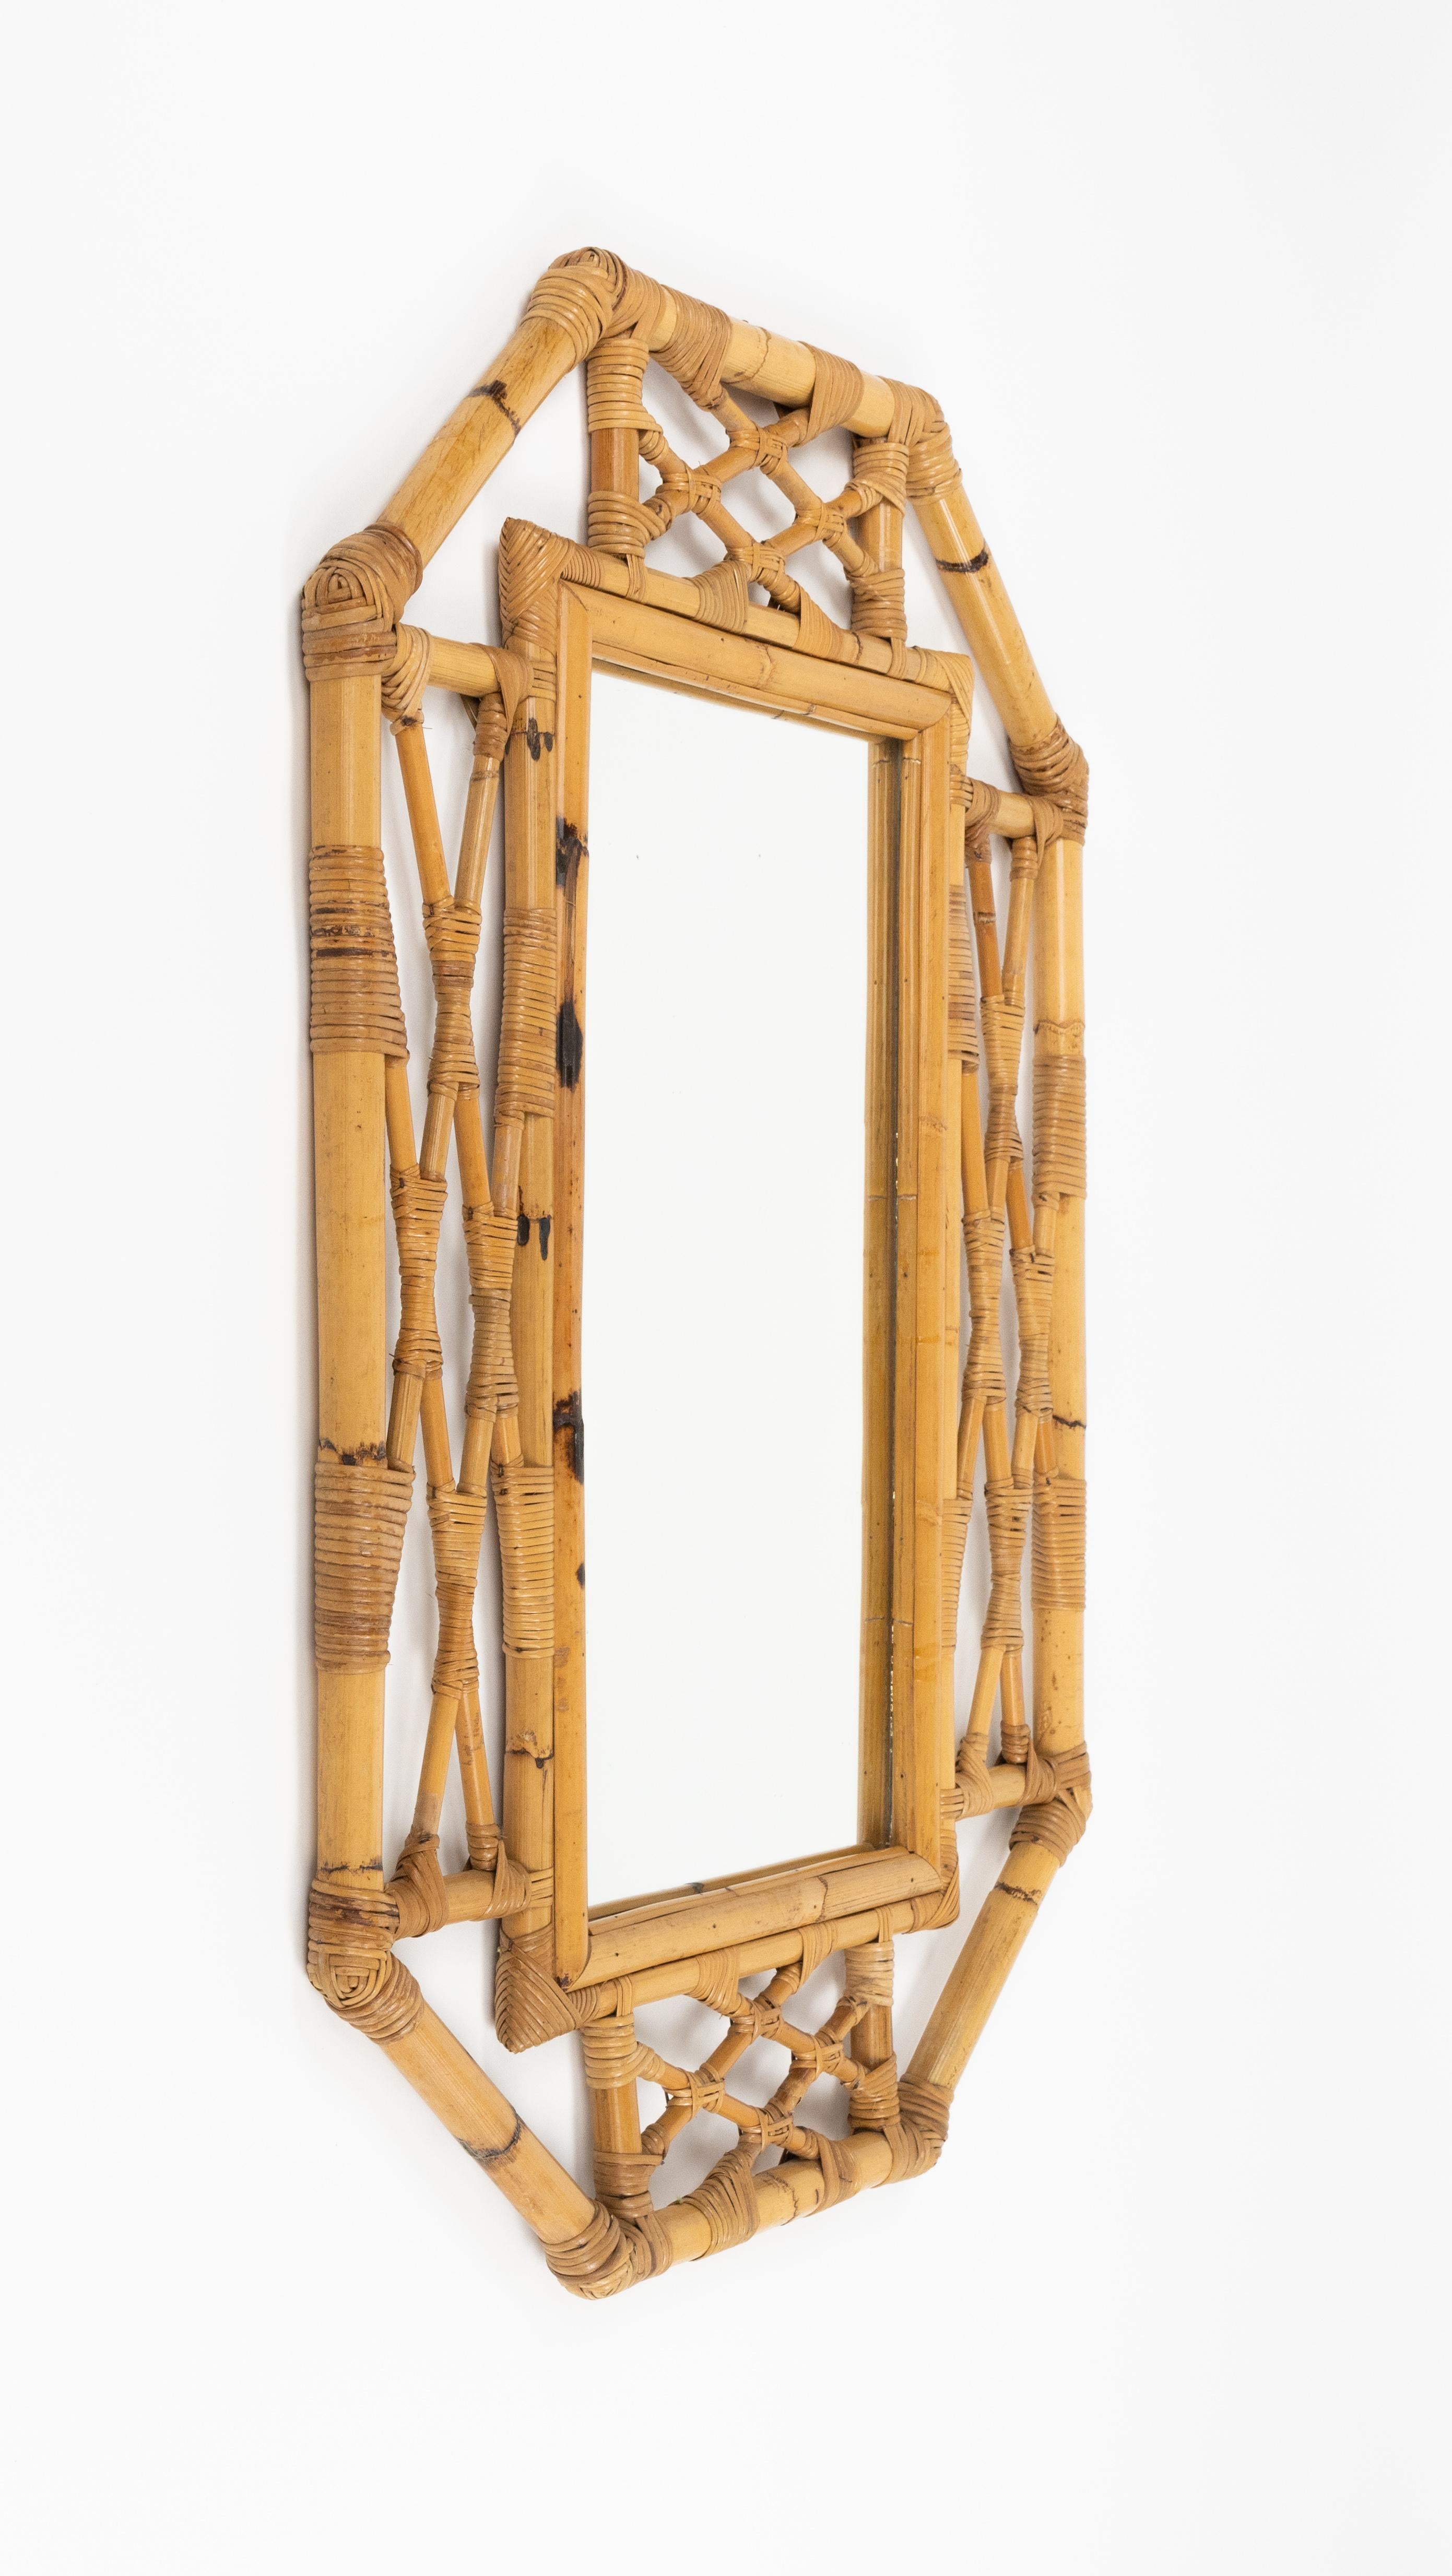 Midcentury amazing geometric wall mirror in bamboo and rattan attributed to Vivai Del Sud.

Made in Italy in the 1970s.

Vivai del sud, Gabriella Crespi and Arpex were the three leading design studios in 1970s Italy specialized in this high-end